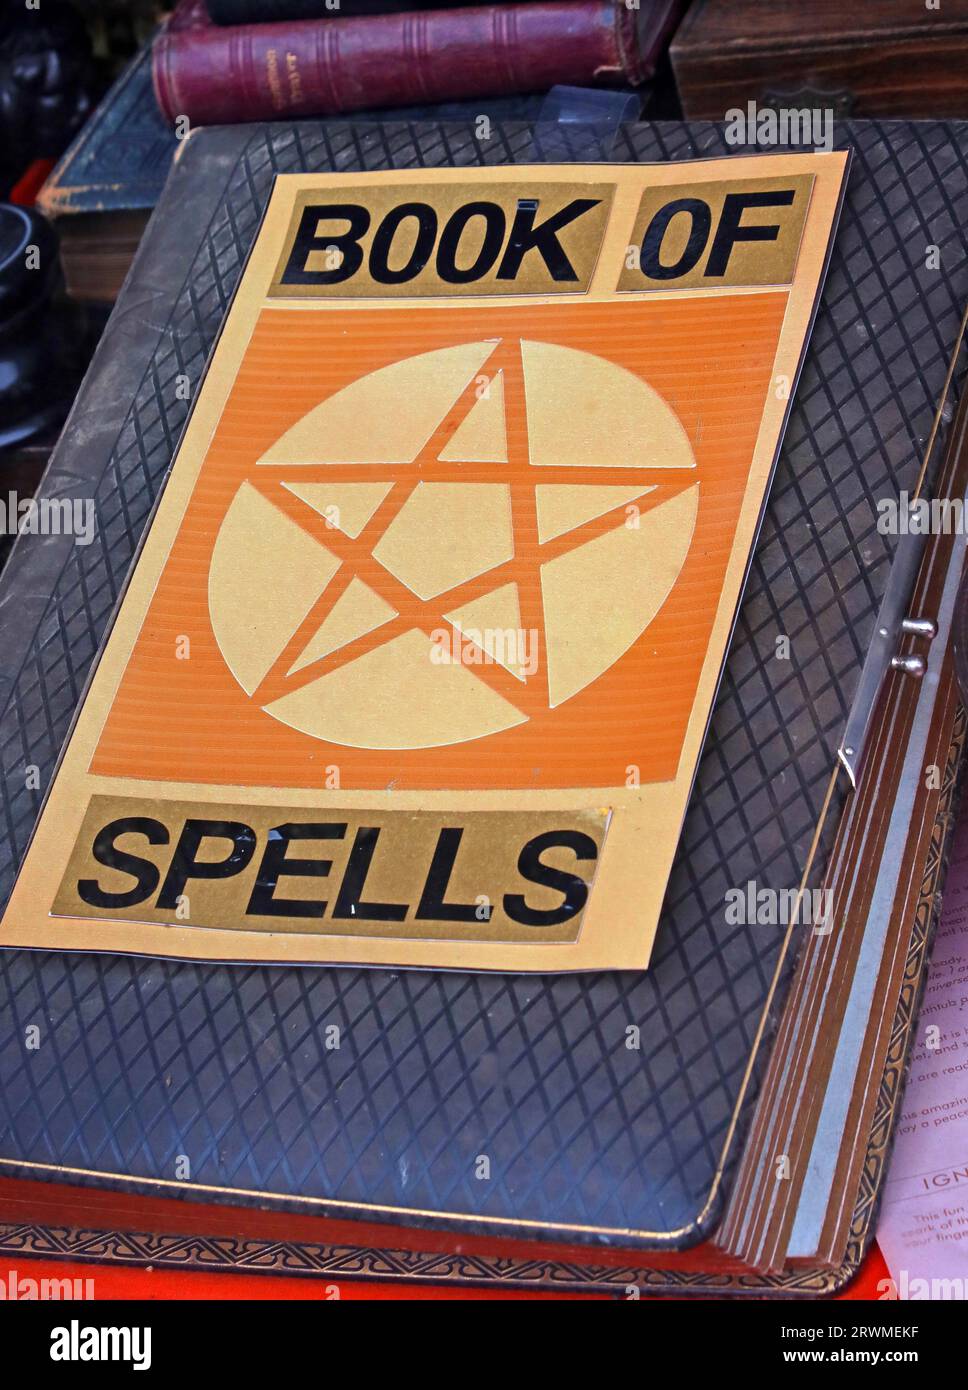 Traditional occult book of spells, available for sale in a shop, in Barnard Castle, Teesdale, Co Durham, England, UK, DL12 8PH Stock Photo